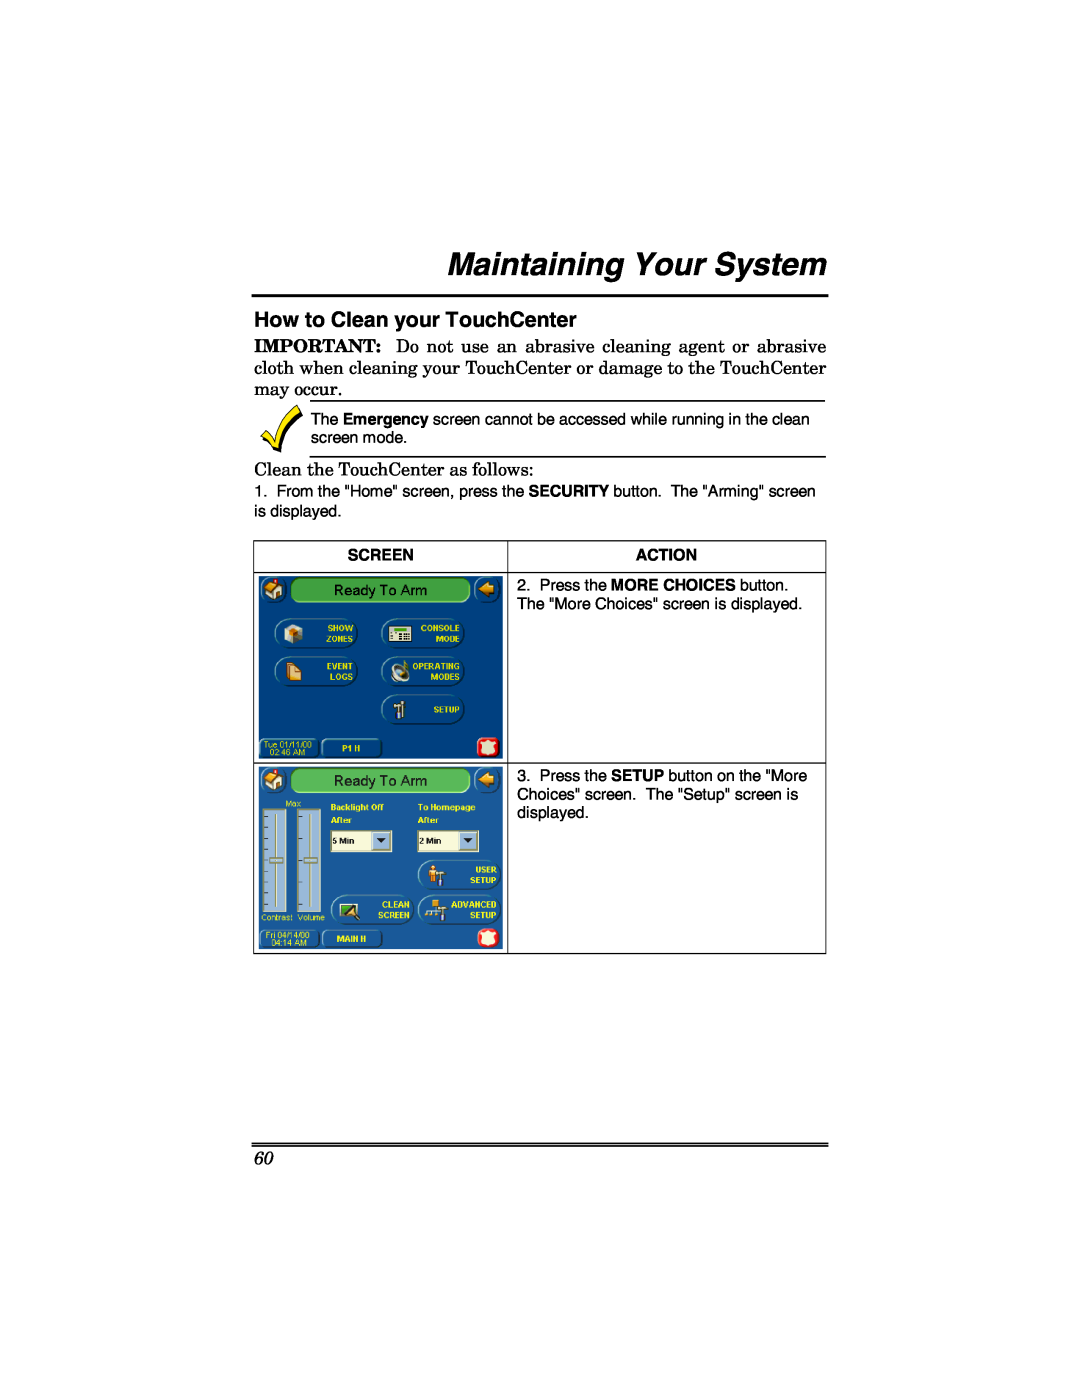 Honeywell 6271 manual Maintaining Your System, How to Clean your TouchCenter, Screen, Action 